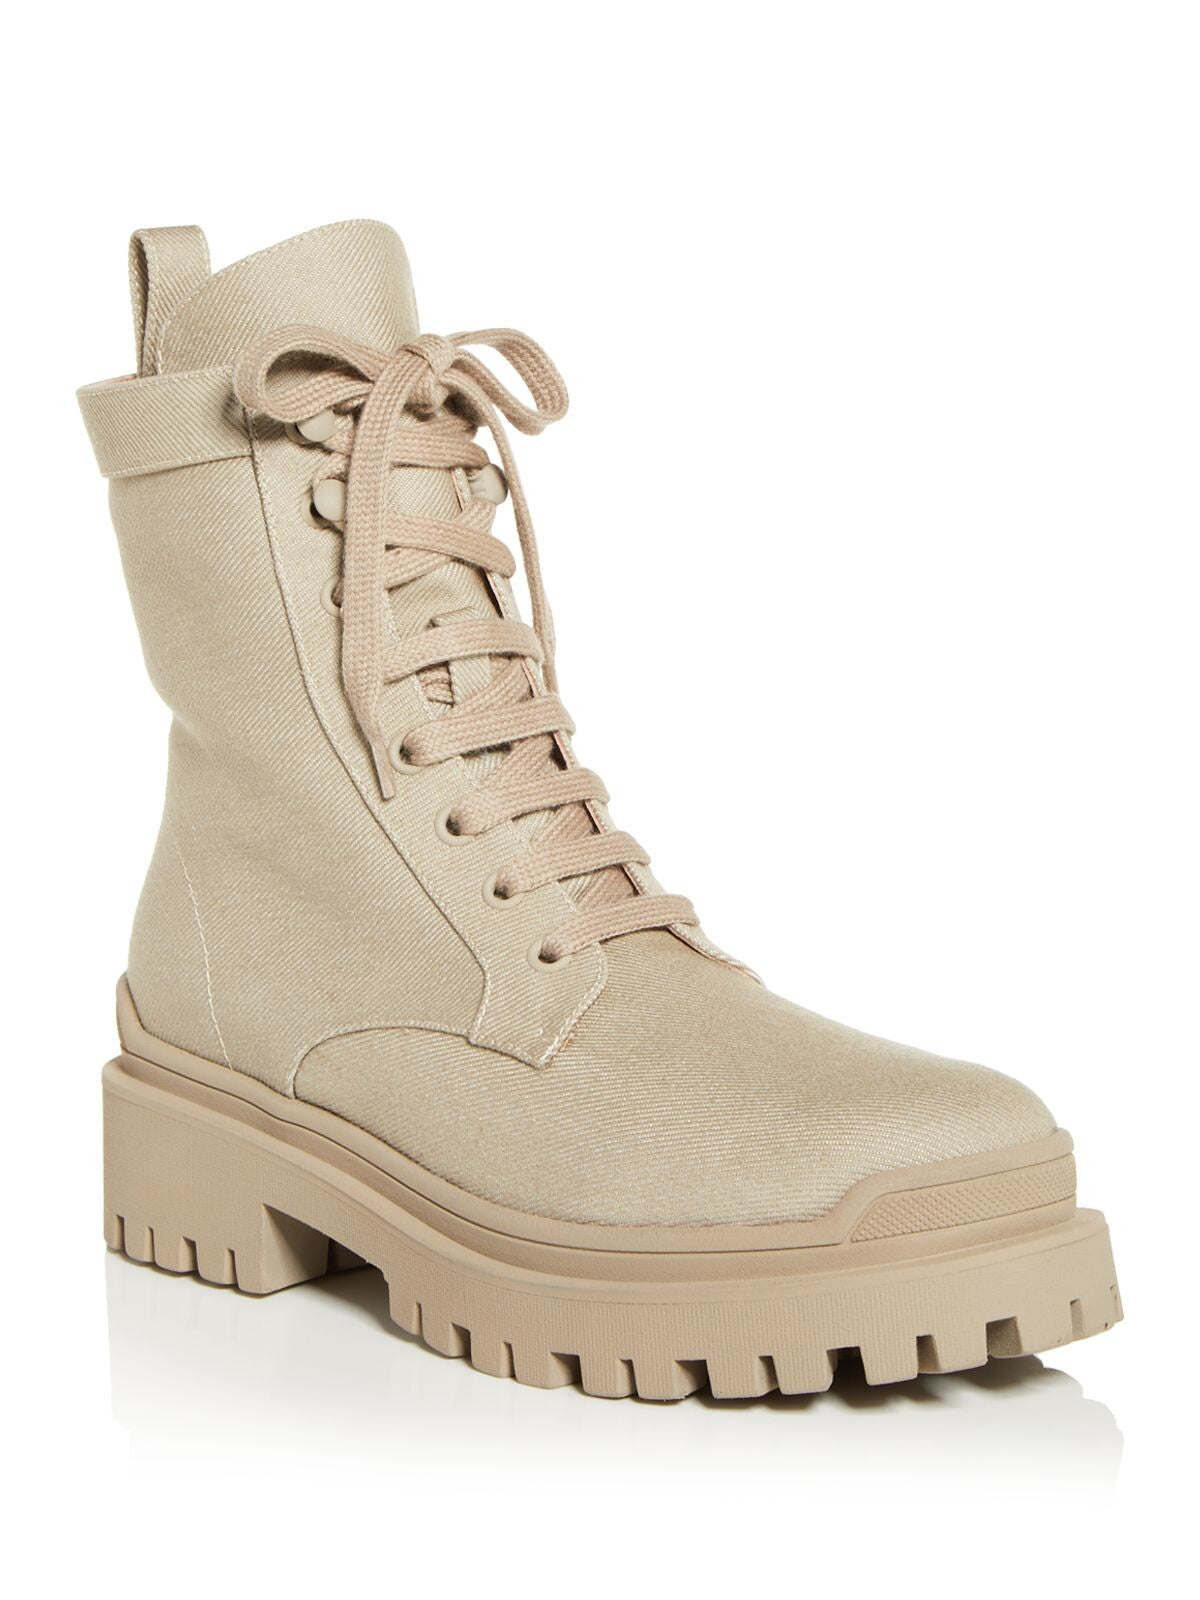 ILIO SMERALDO Womens Beige Pull Tab Cushioned Eyelet Sulcer Round Toe Block Heel Lace-Up Combat Boots 37